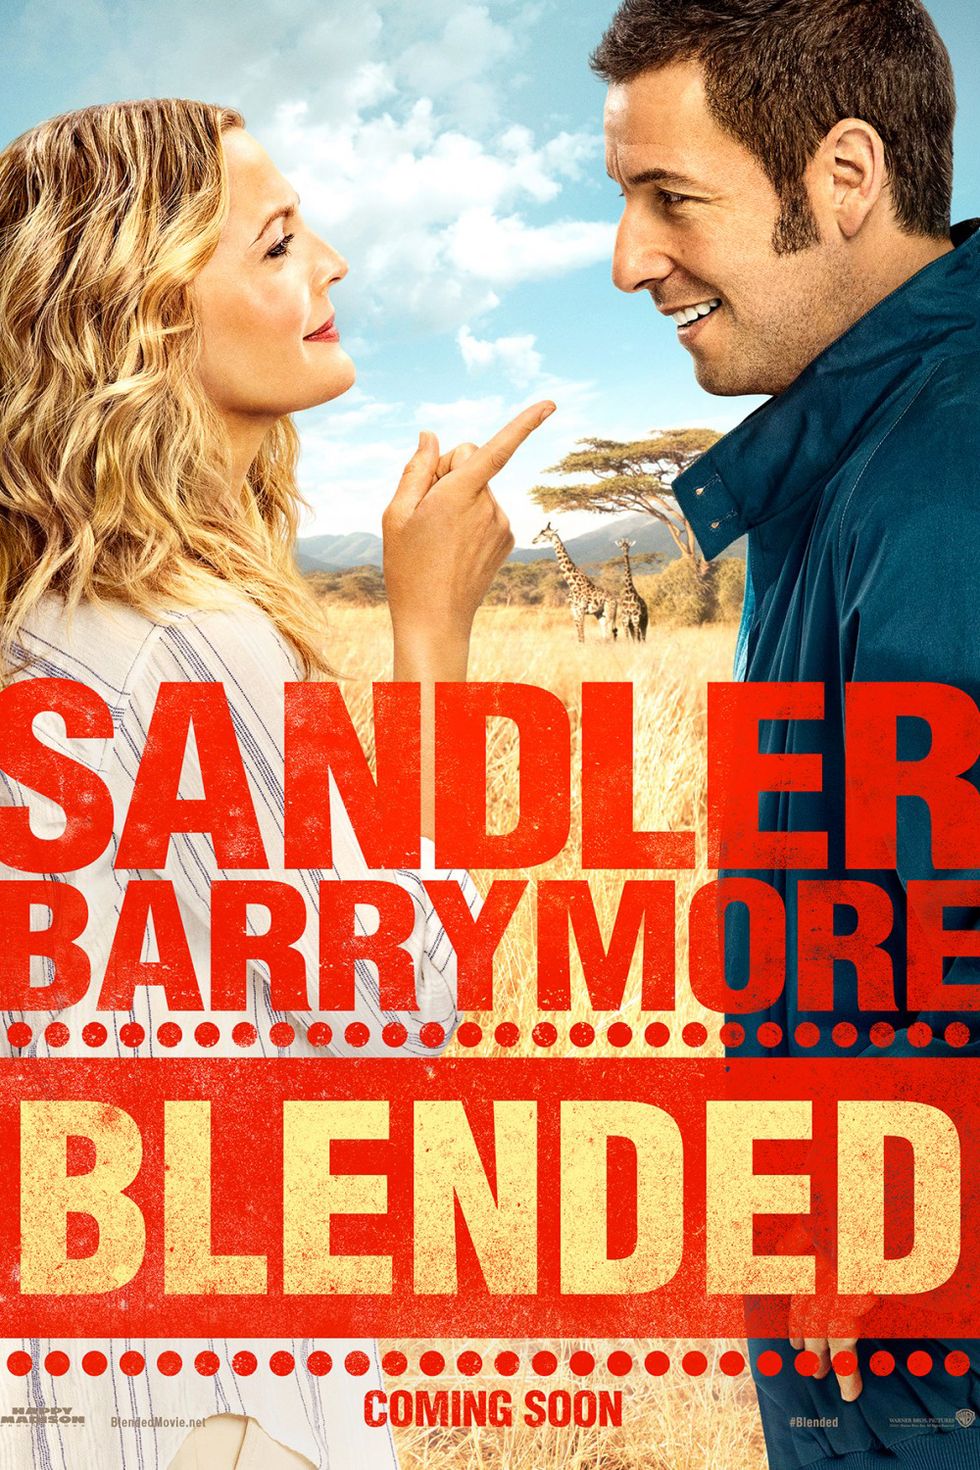 Adam Sandler Movies Ranked From Worst To Best Try Free